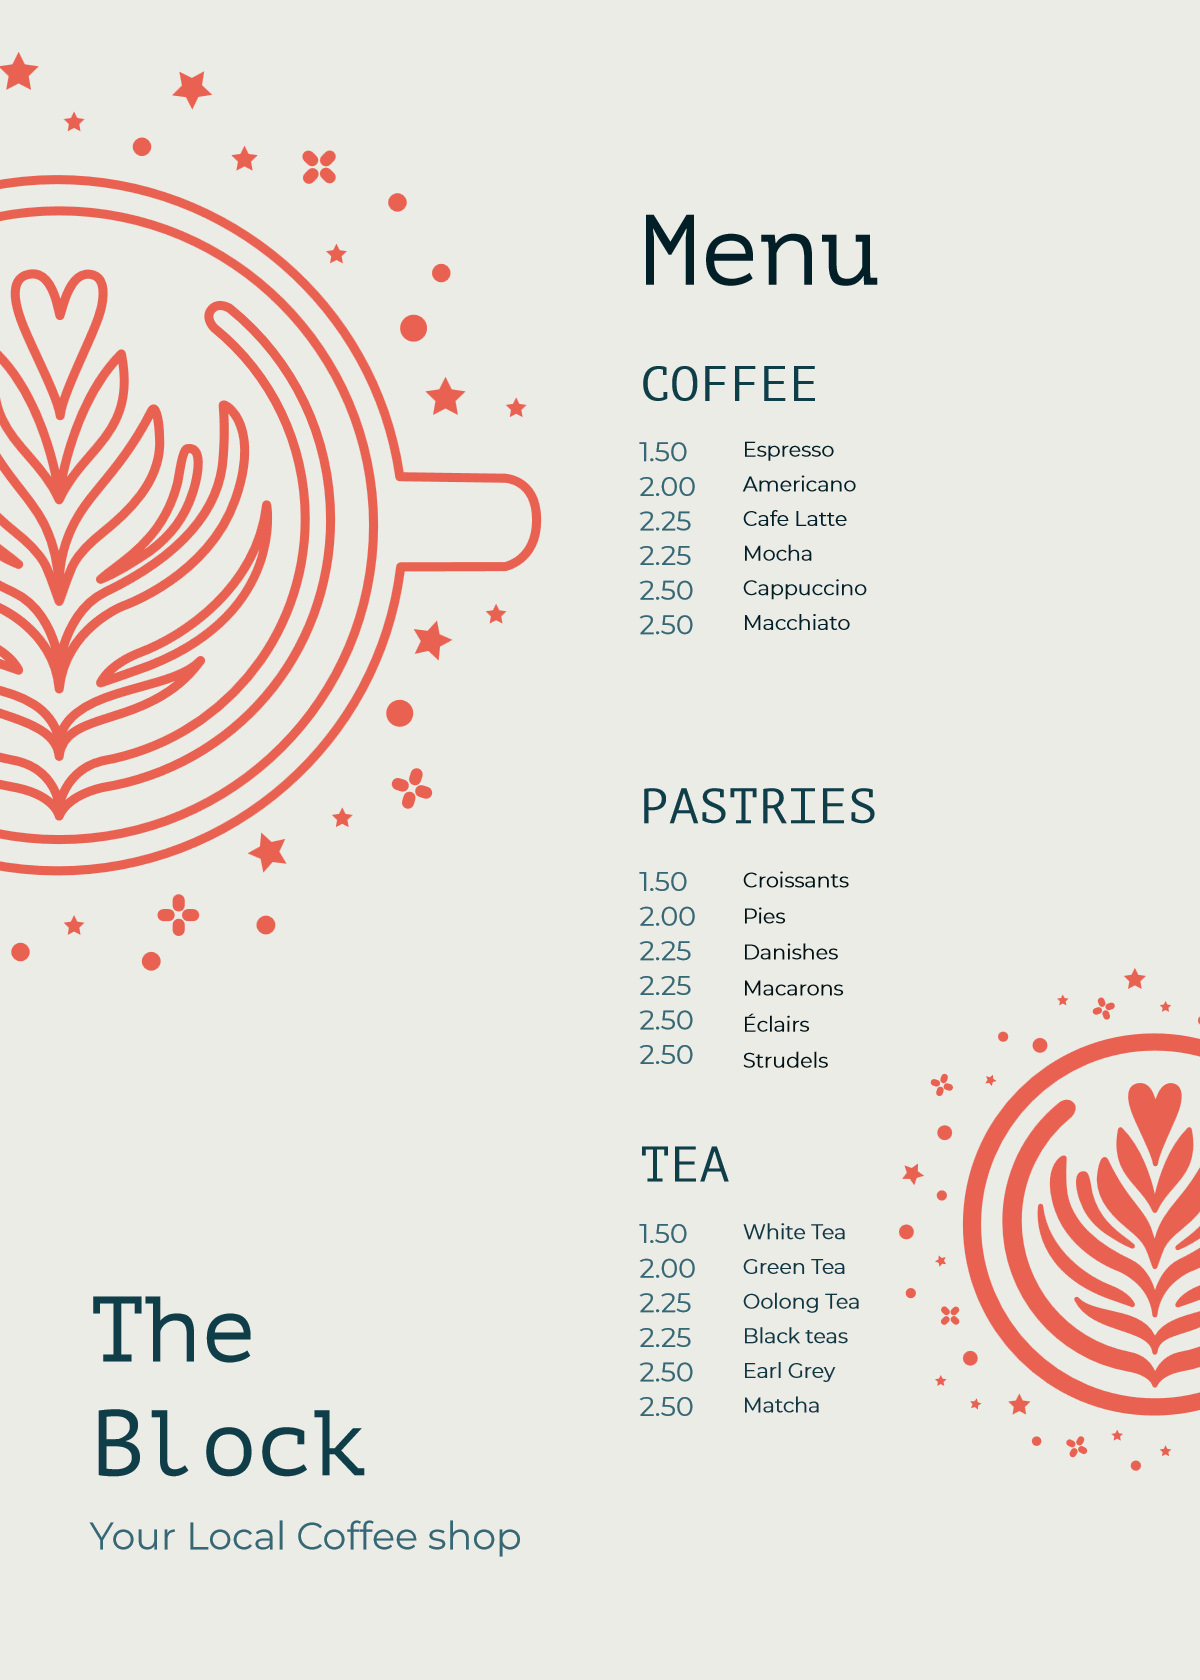 22 Free Simple Menu Templates For Restaurants, Cafes, And Parties Intended For Free Restaurant Menu Templates For Microsoft Word